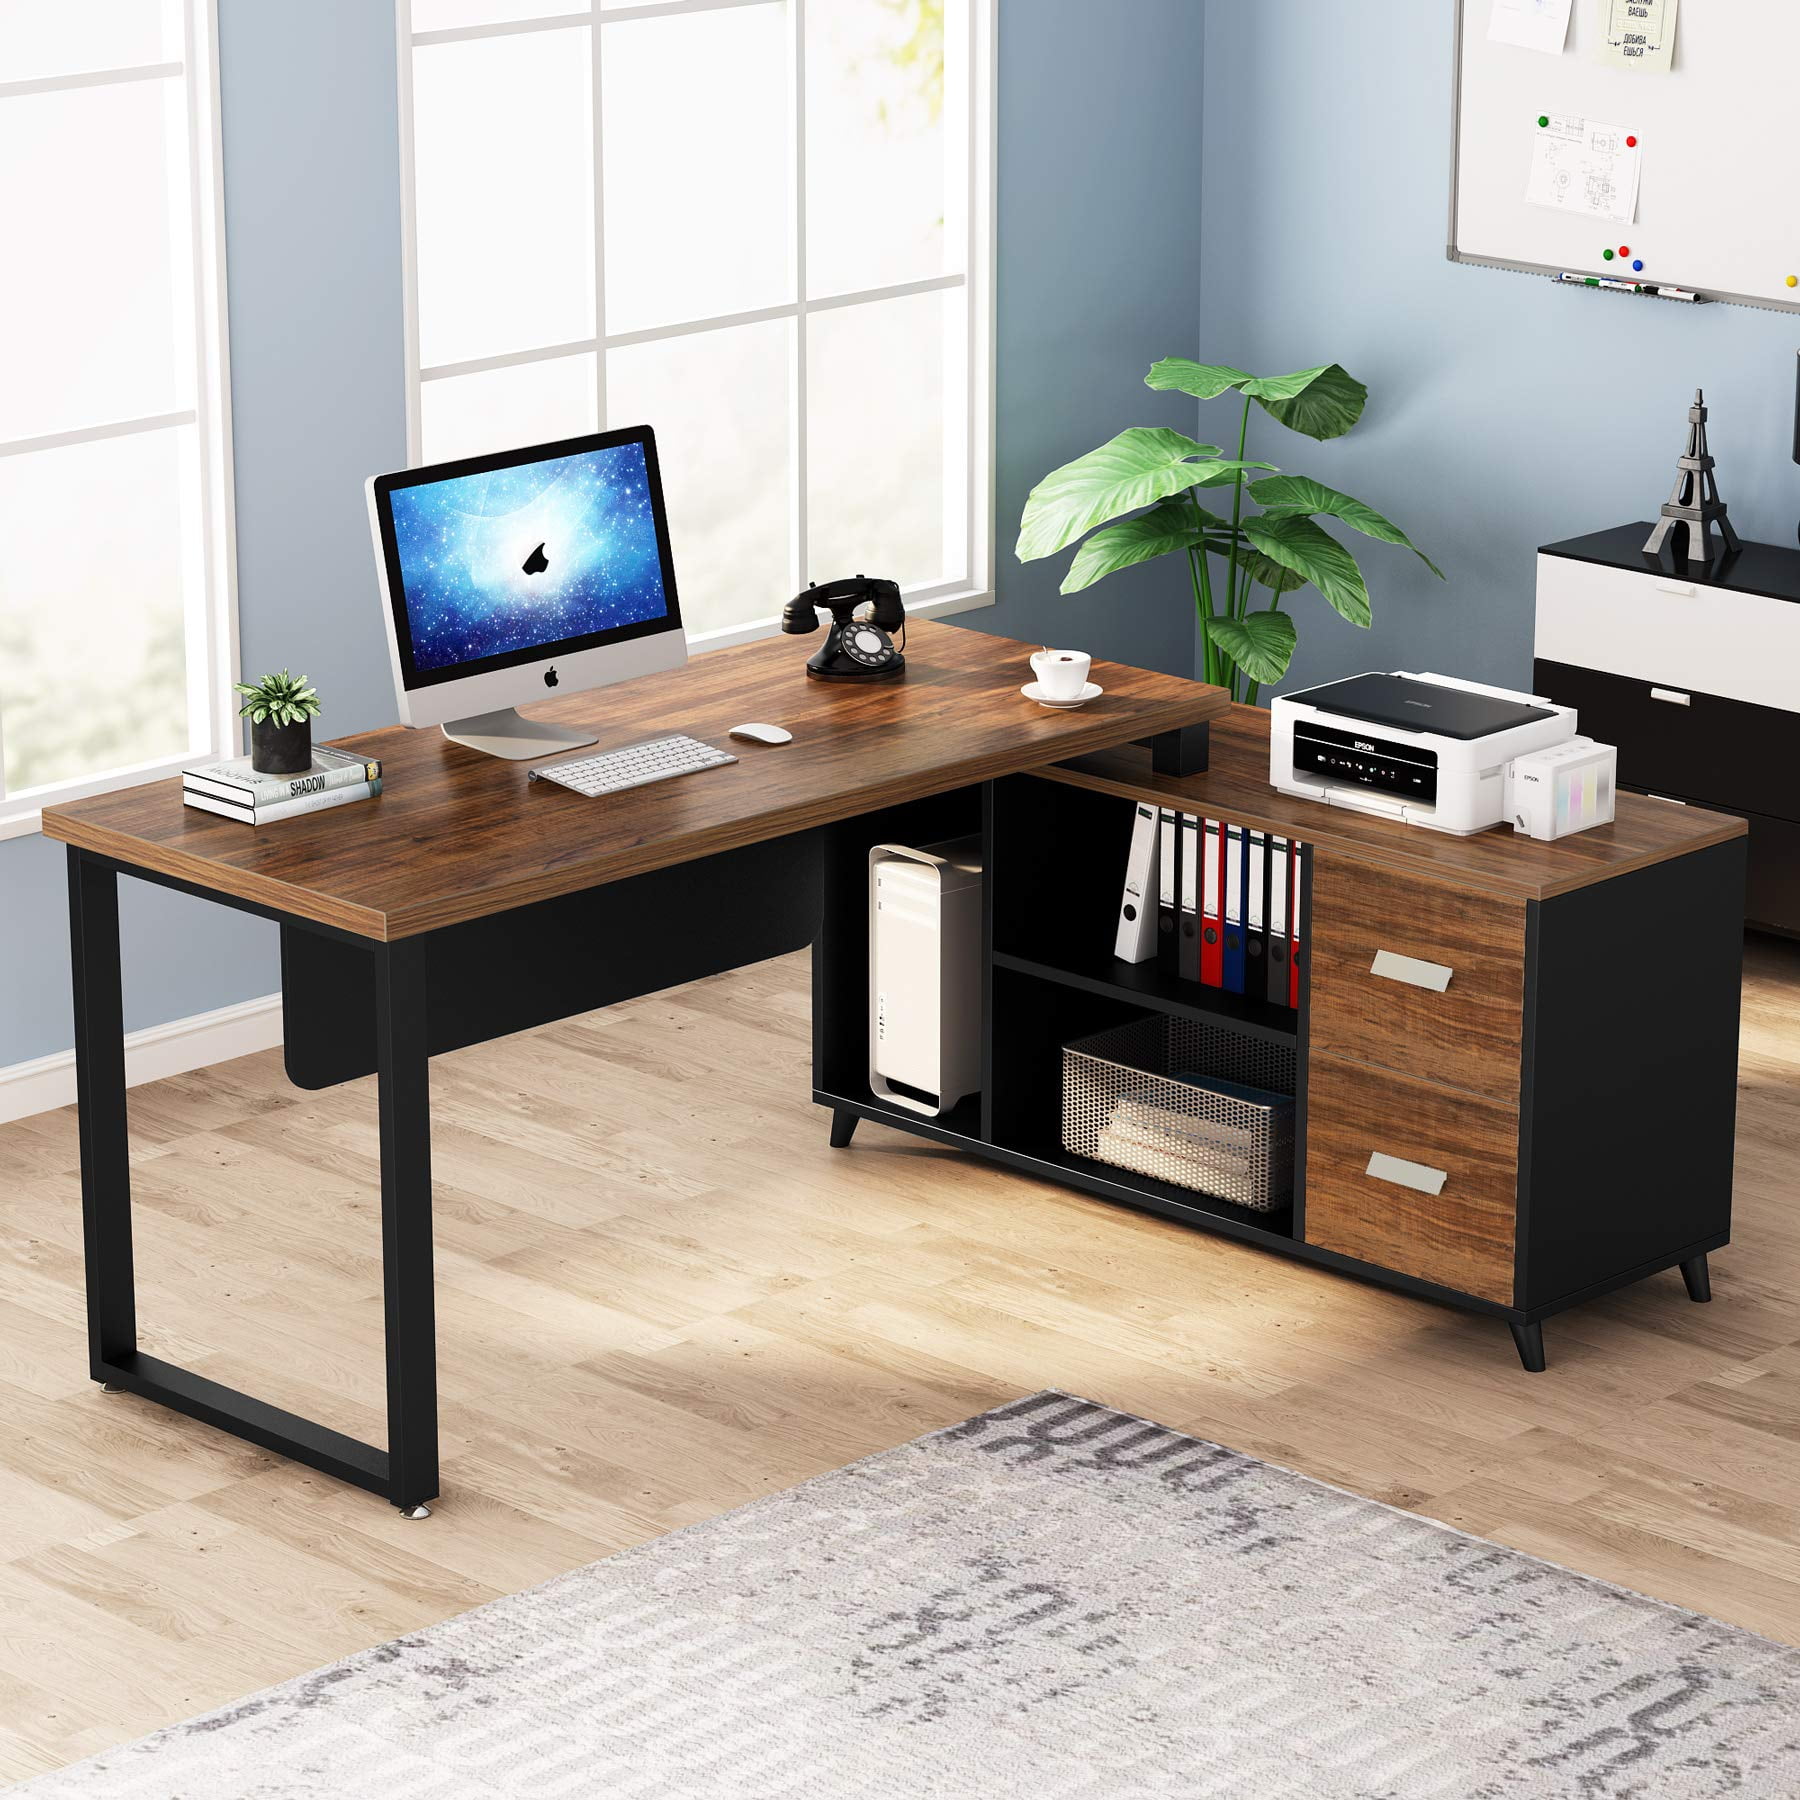 Computer desk with drawers